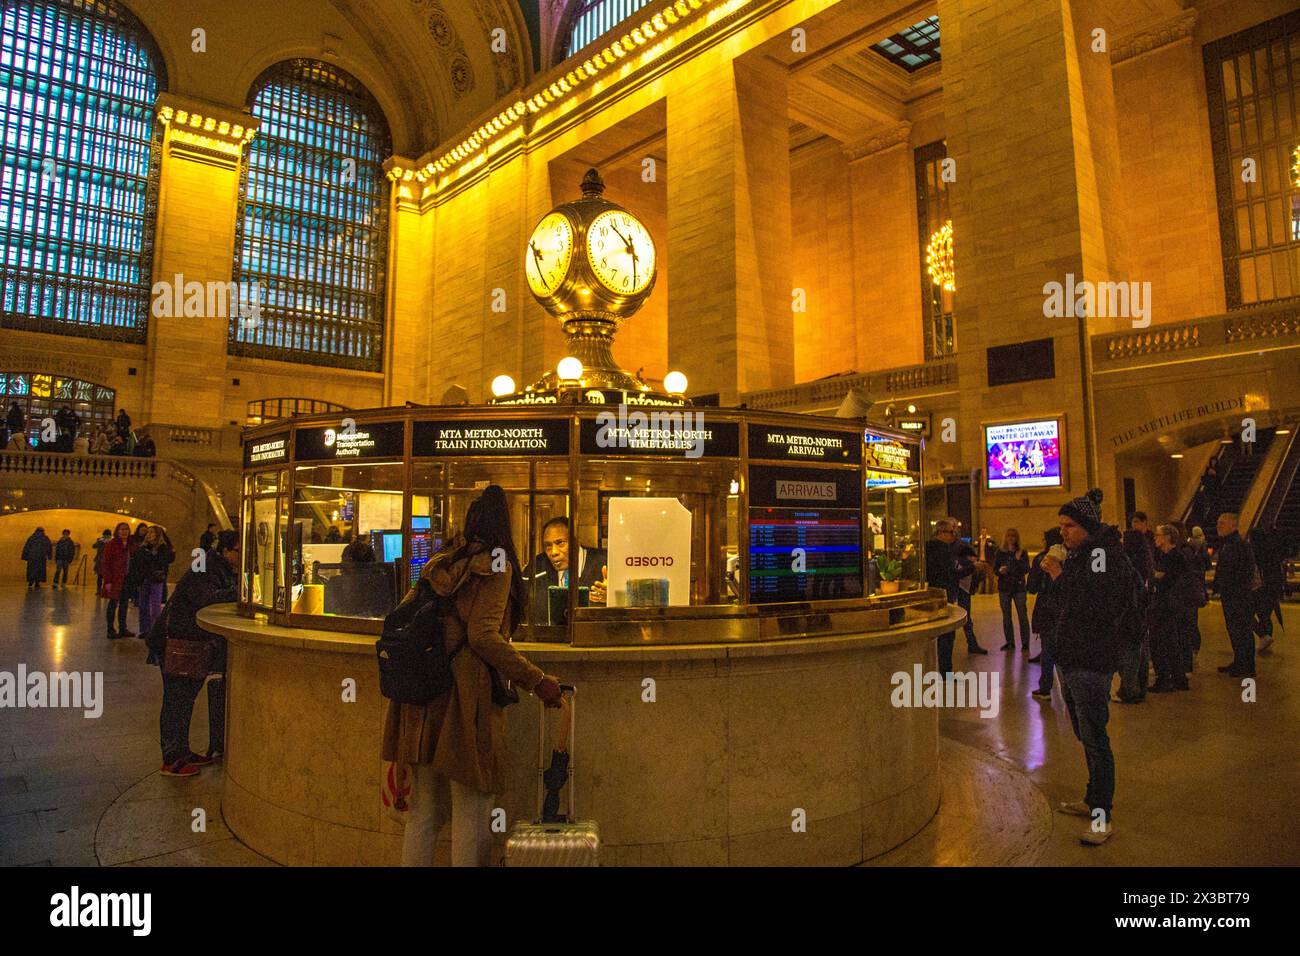 The famous four-sided opal clock of the information centre in the main hall of Grand Central Station, New York's main train station, Midtown Stock Photo